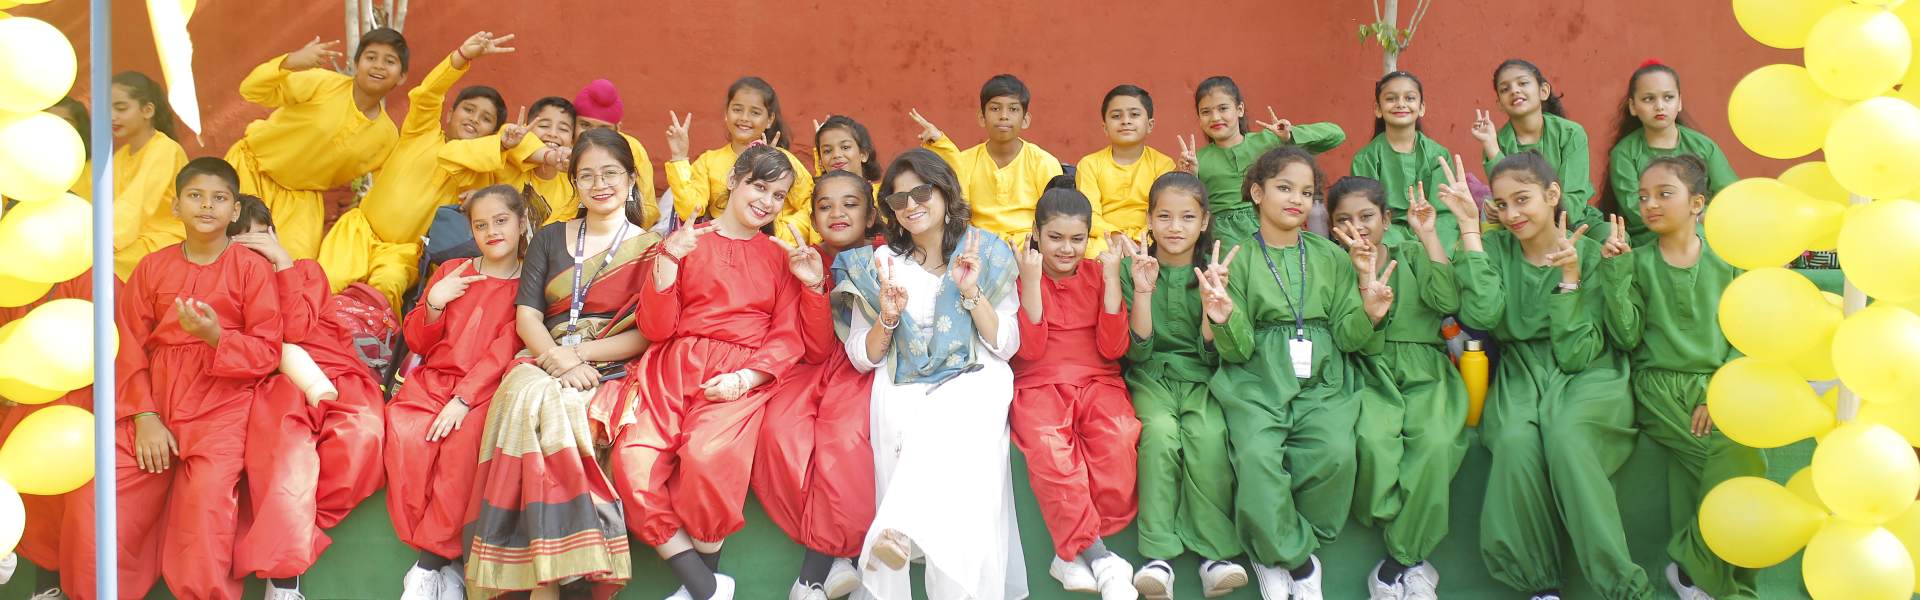 Events Celebration at the Asian School